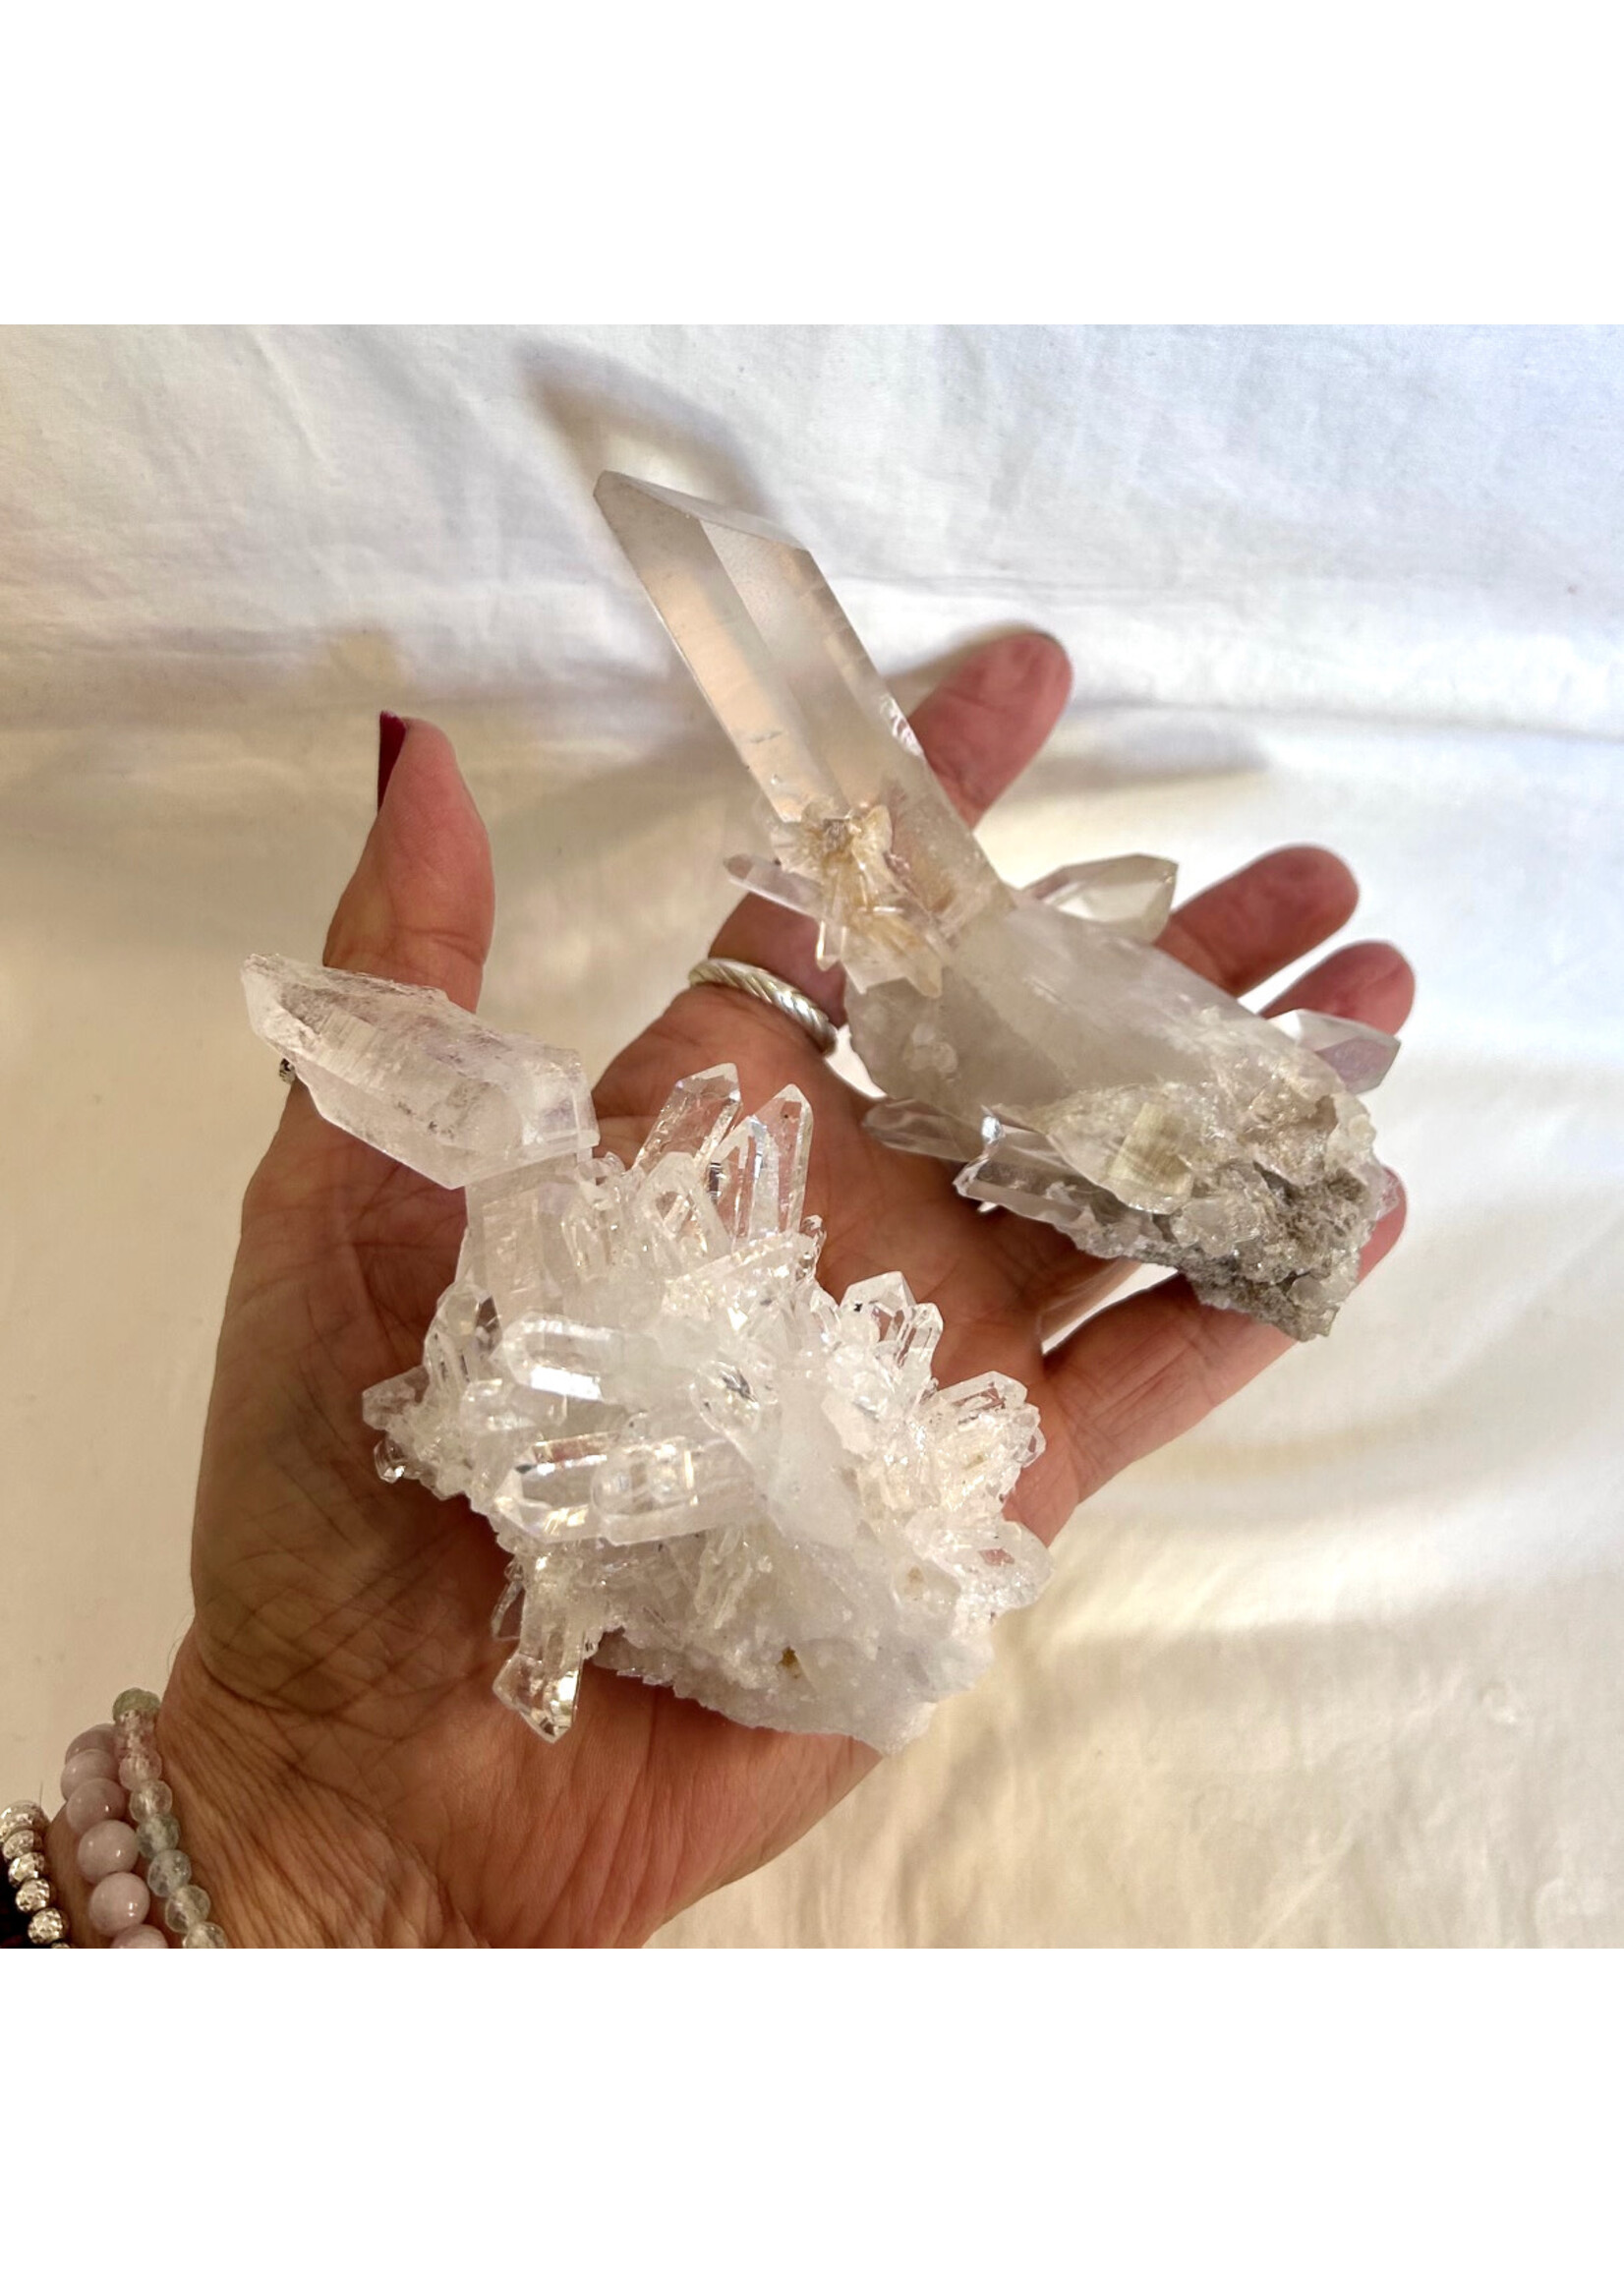 Crystallized Water Quartz Clusters